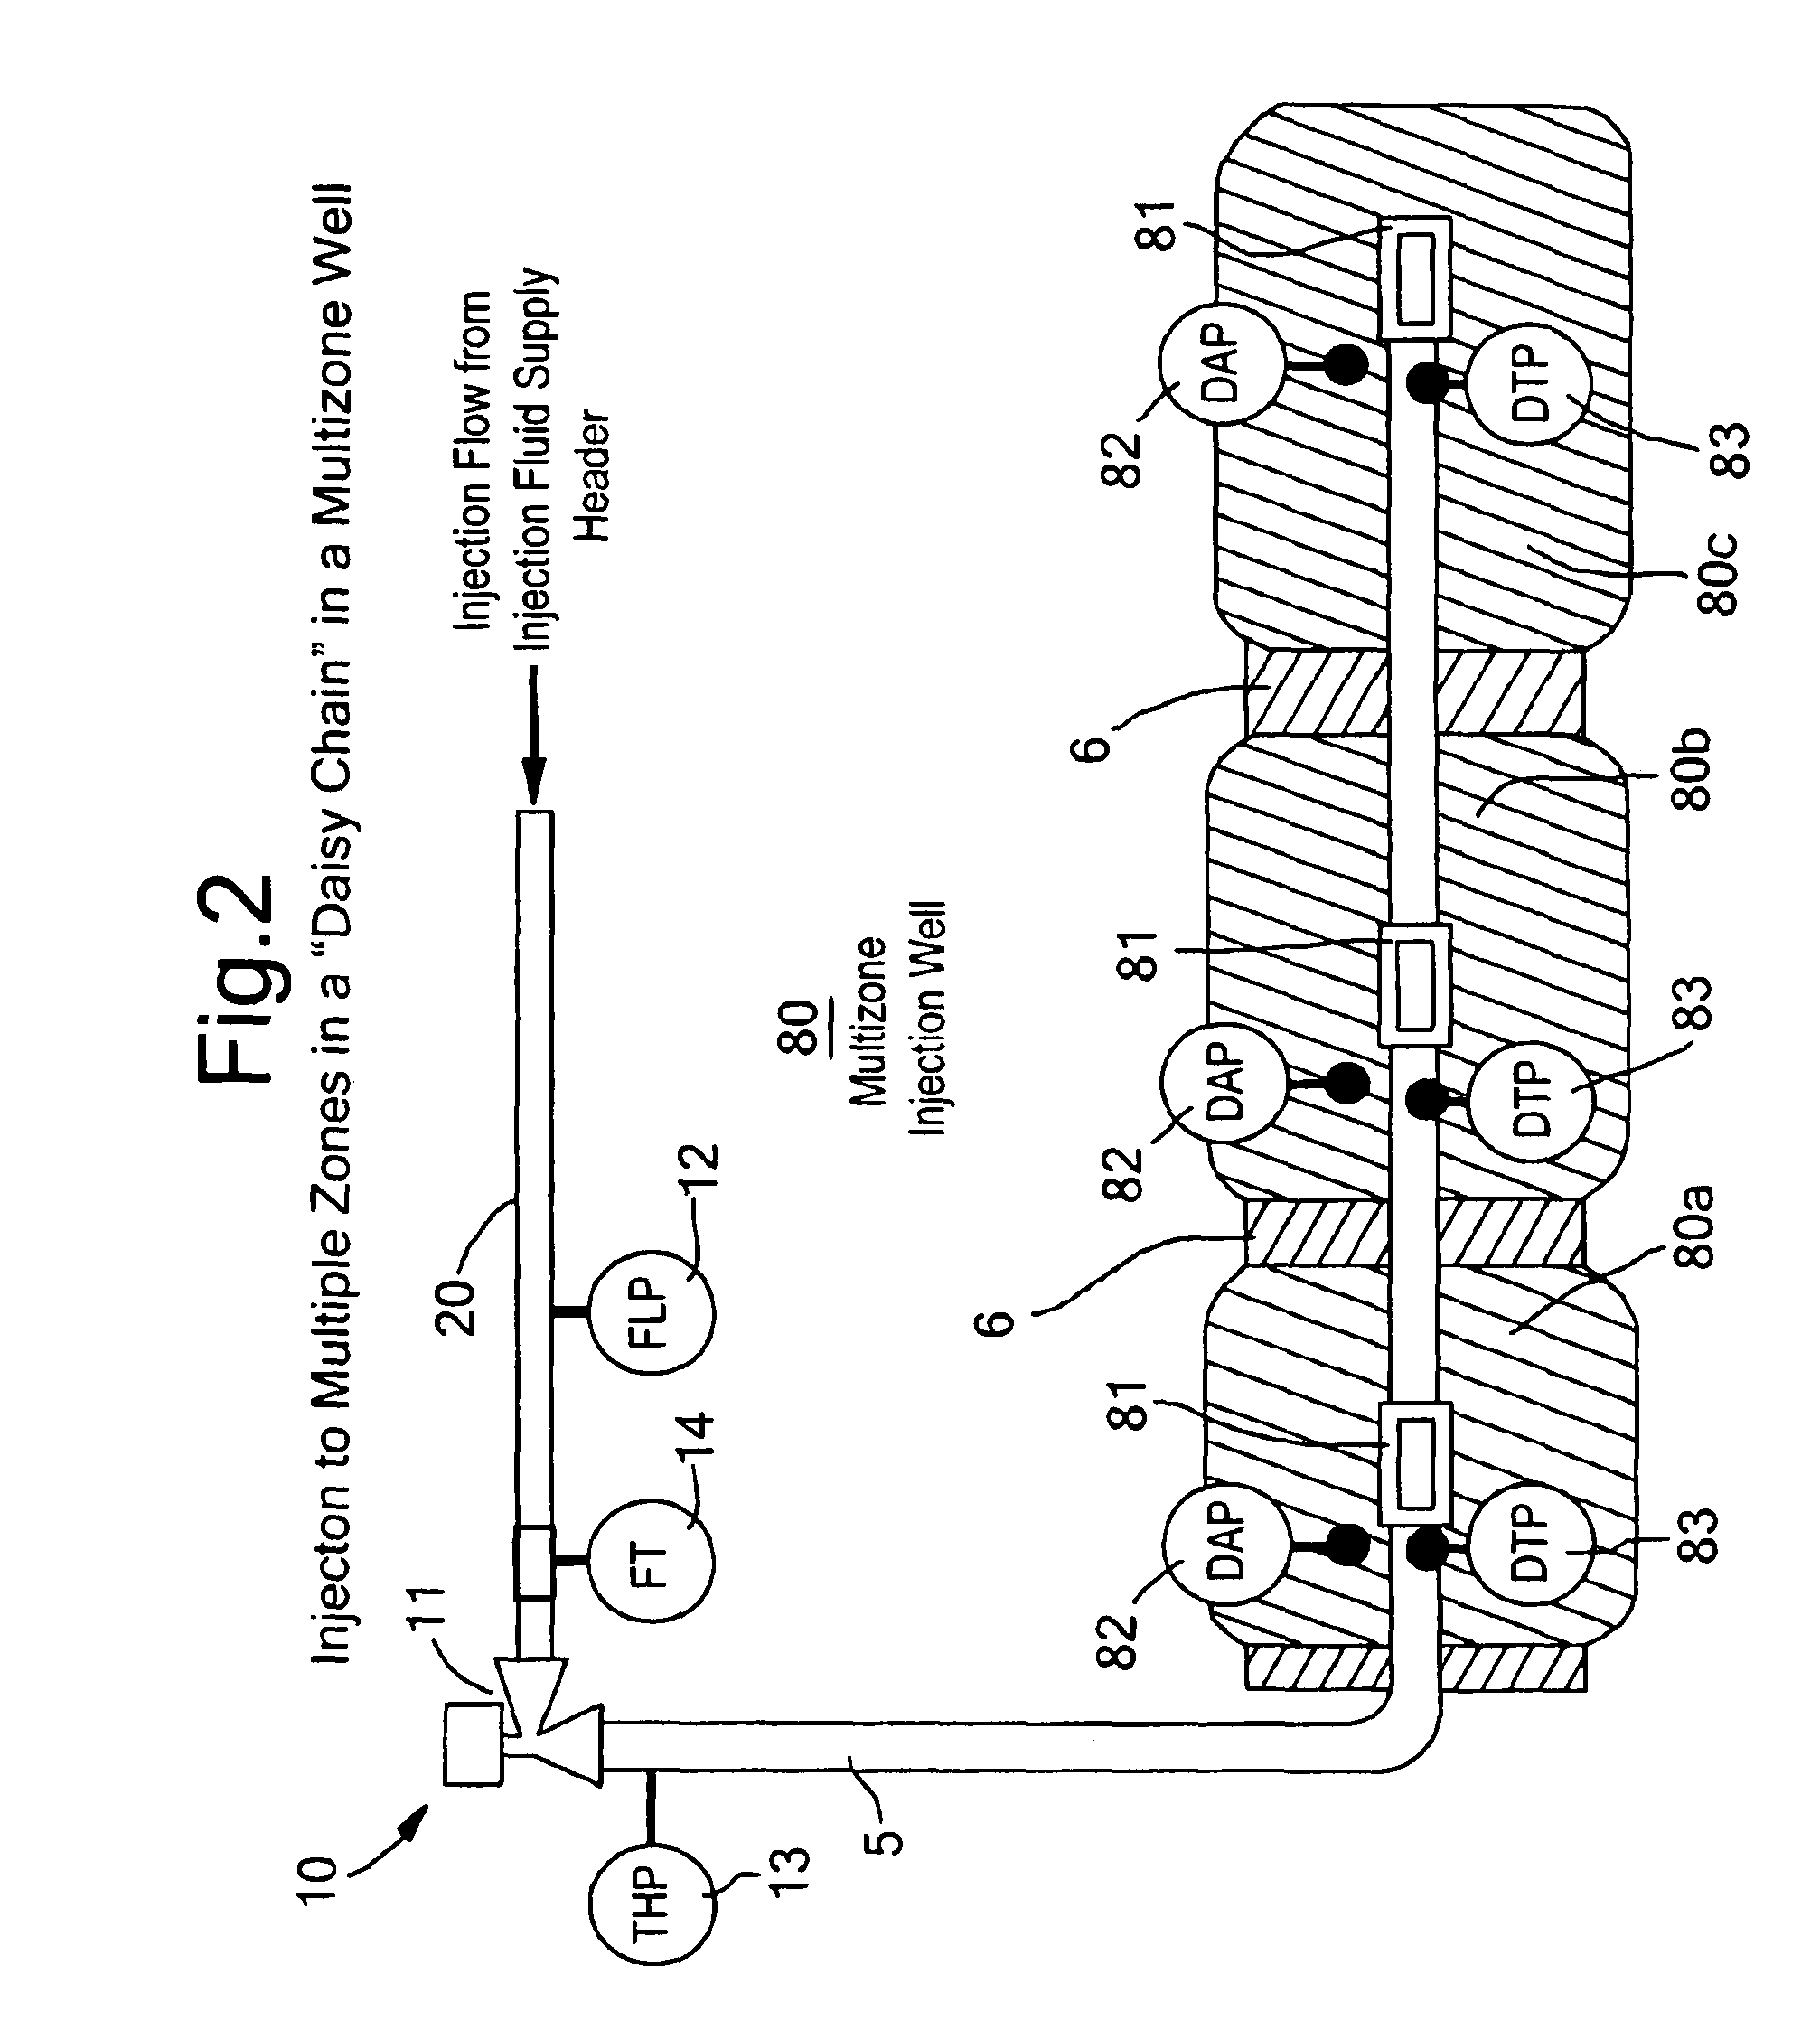 Method for virtual metering of injection wells and allocation and control of multi-zonal injection wells